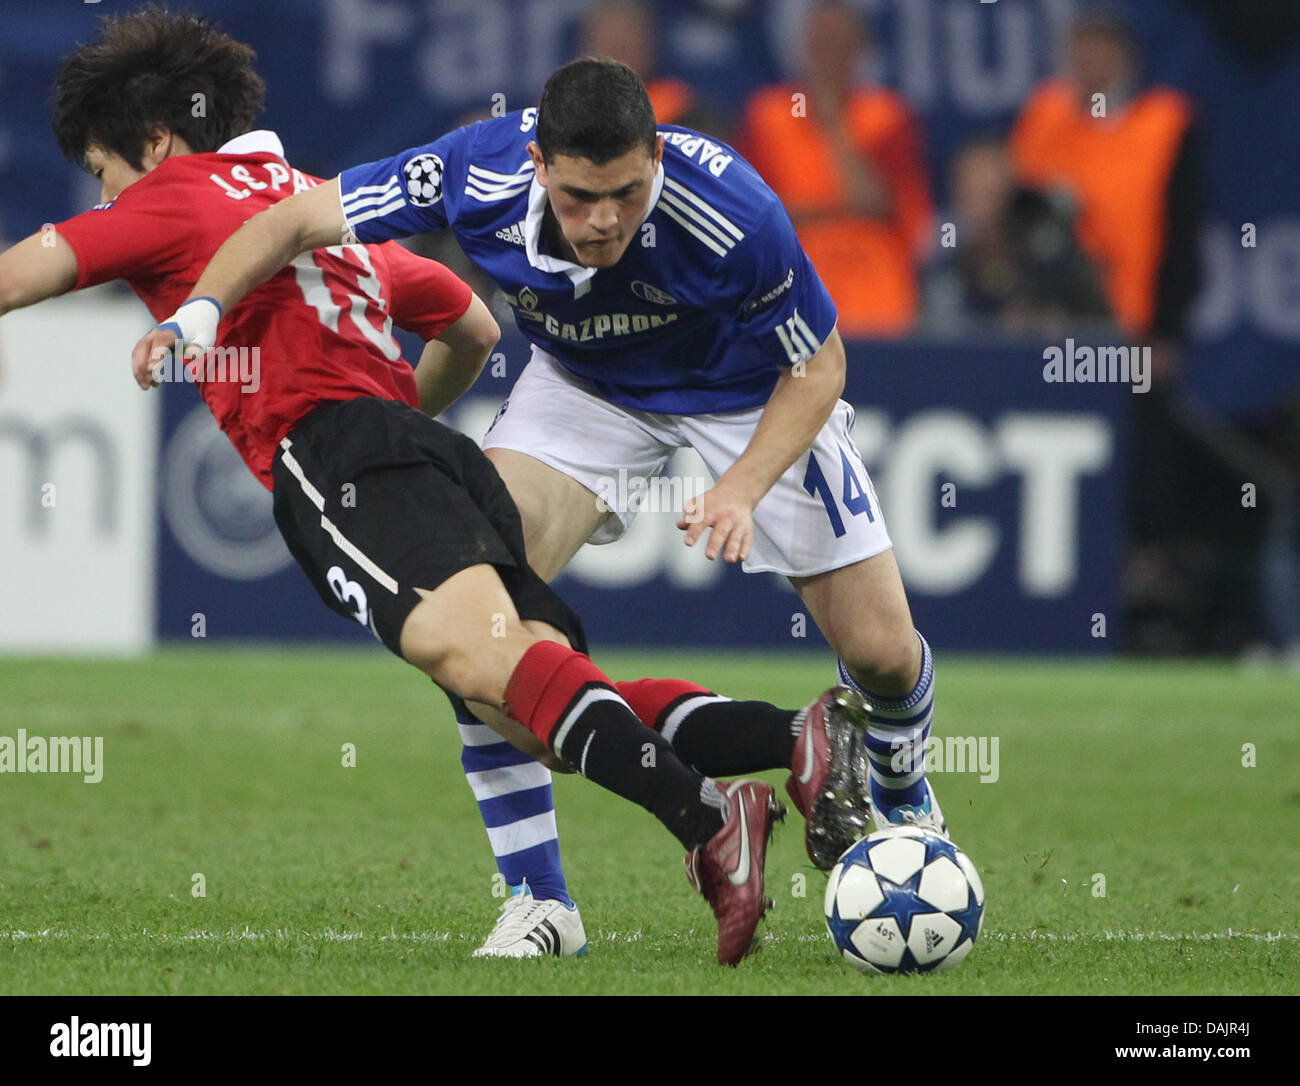 Schalke's Kyriakos Papadopoulos (R) and Manchester's Park Ji-Sung (L) vie for the ball during their UEFA Champions League semi-final match FC Schalke 04 vs Manchester United at the Arena AufSchalke in Gelsenkirchen, Germany, 26 April 2011. Photo: Friso Gentsch Stock Photo